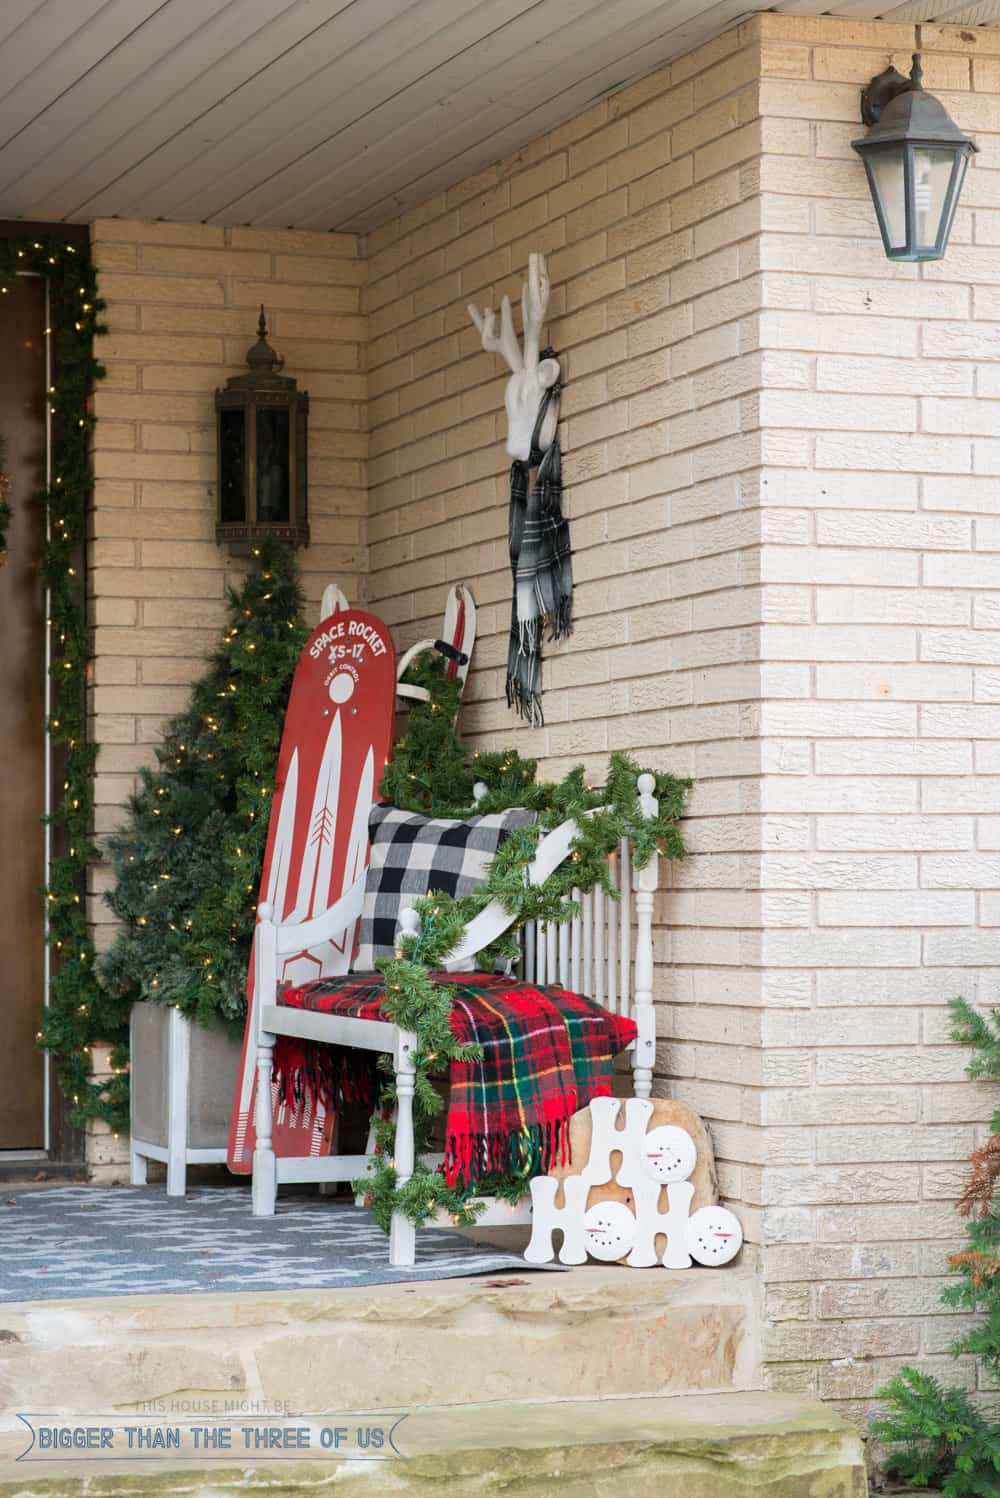 Decorating Front Porch For Christmas
 Decorating Your Front Porch For Christmas Bigger Than